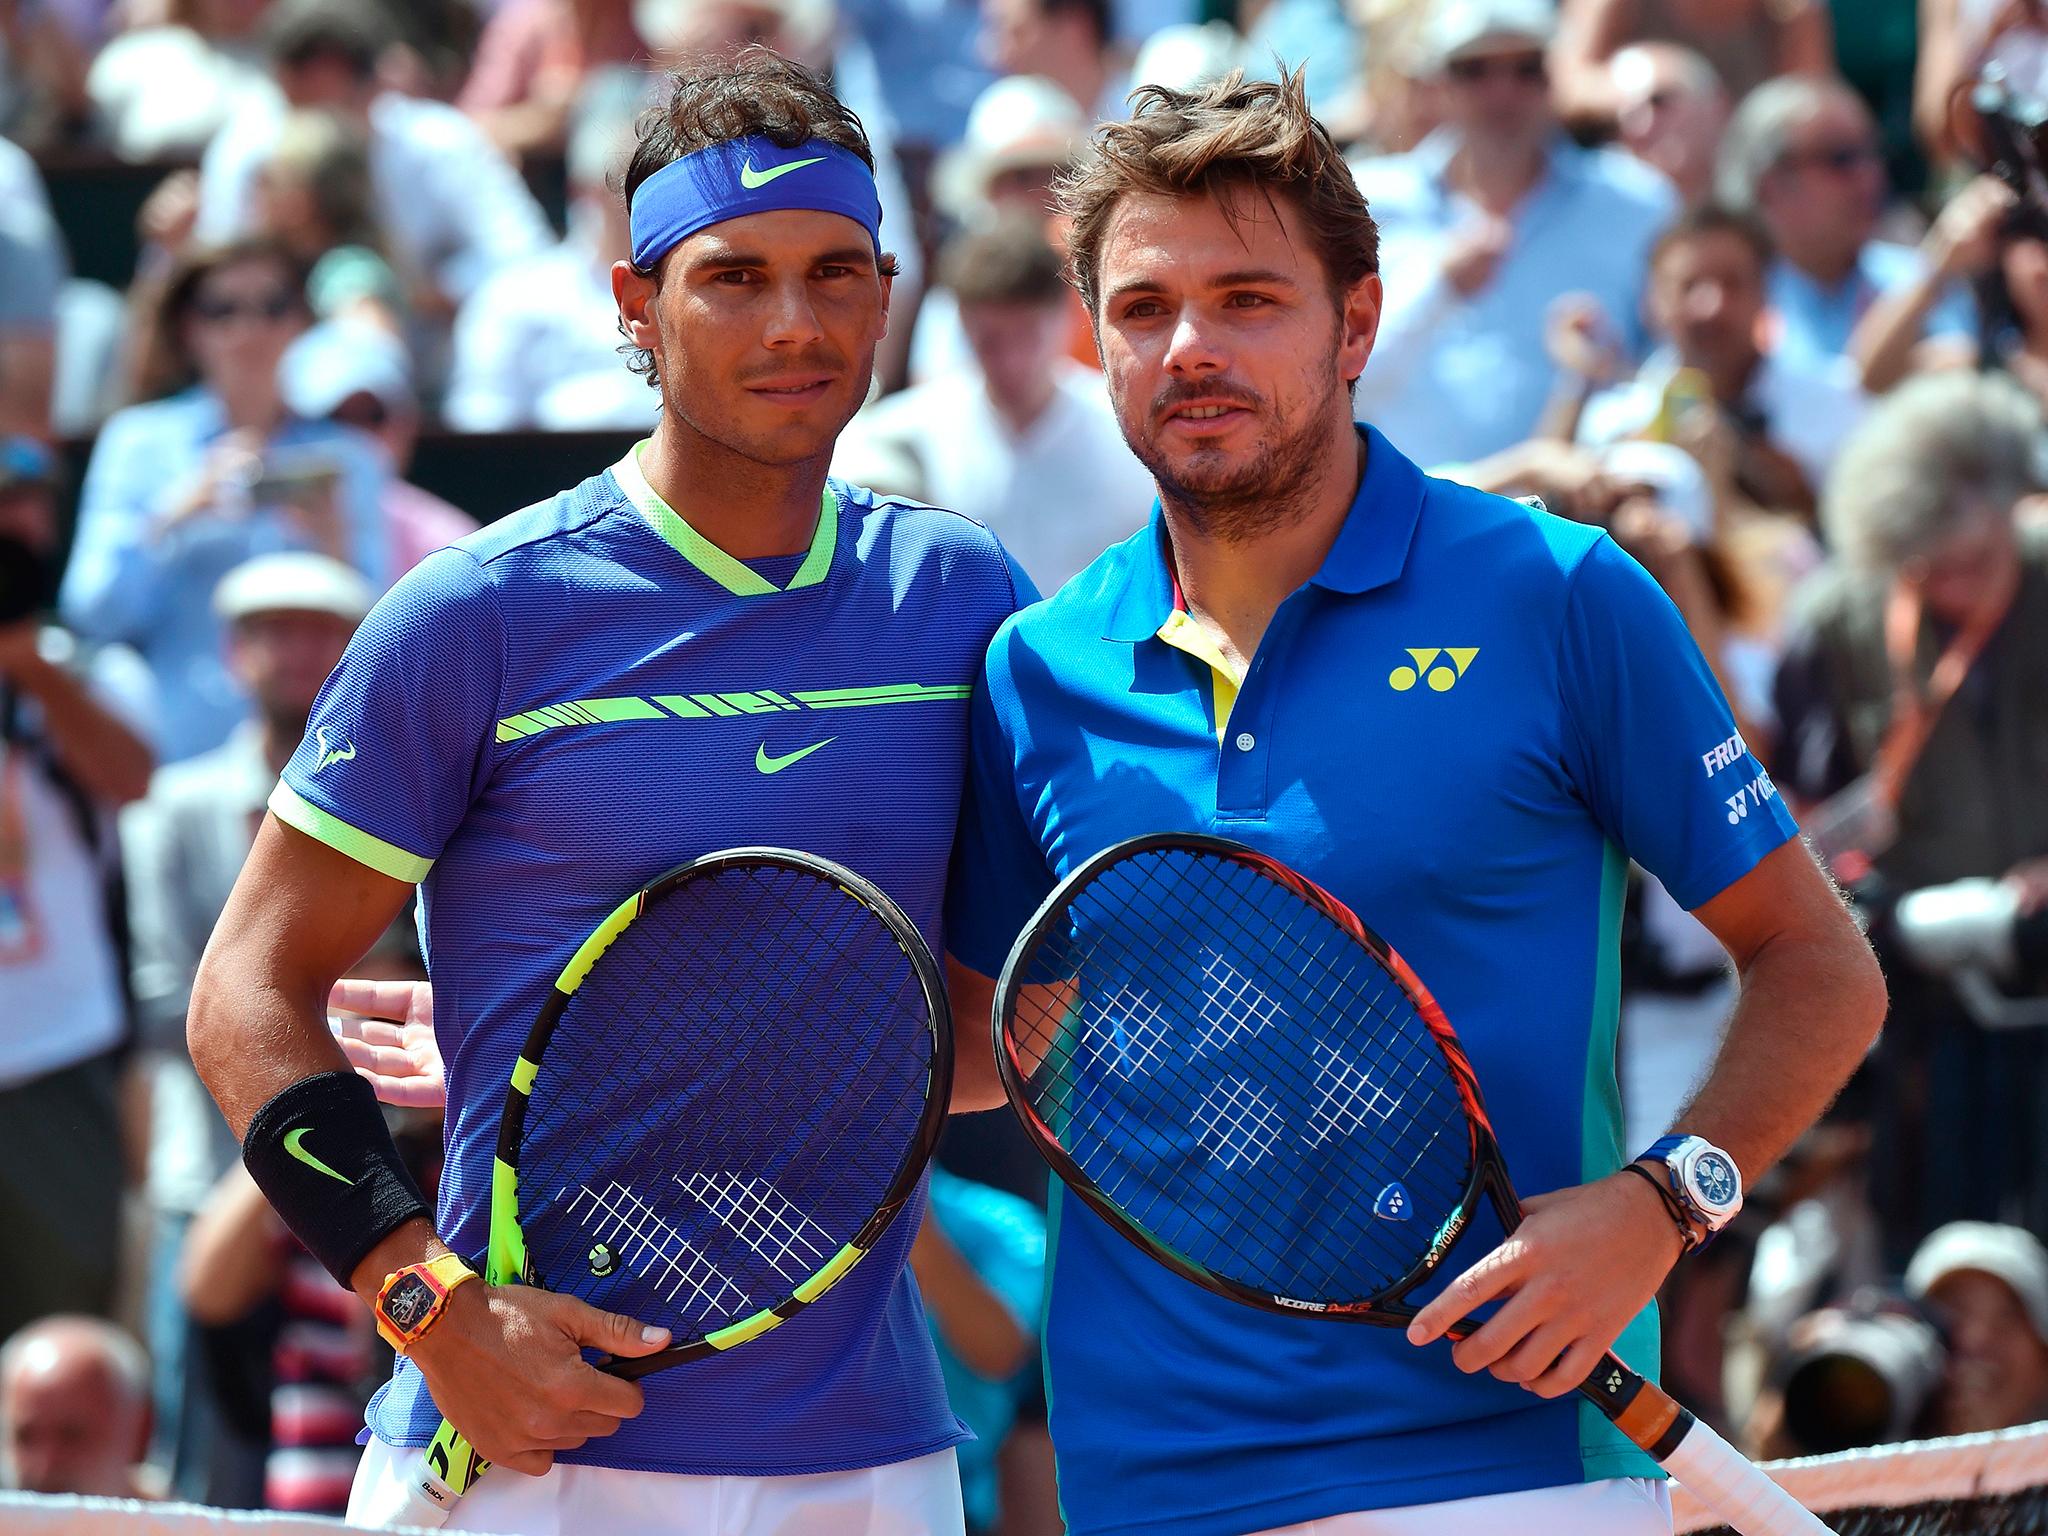 Rafael Nadal (left) and Stan Wawrinka have committed to the Australian Open after injury troubles